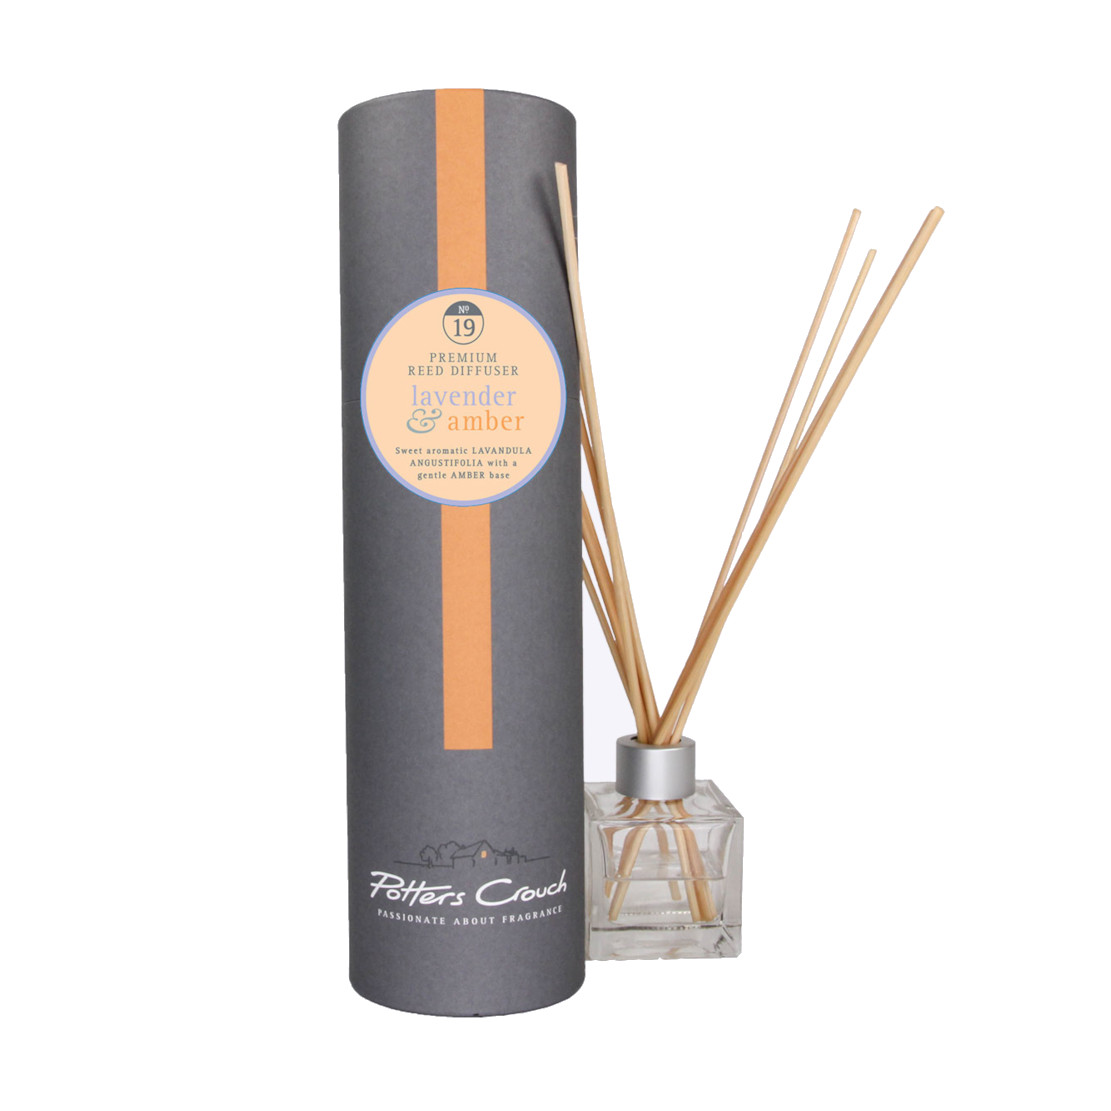 Potters Crouch Lavender and Amber Diffuser 100ml